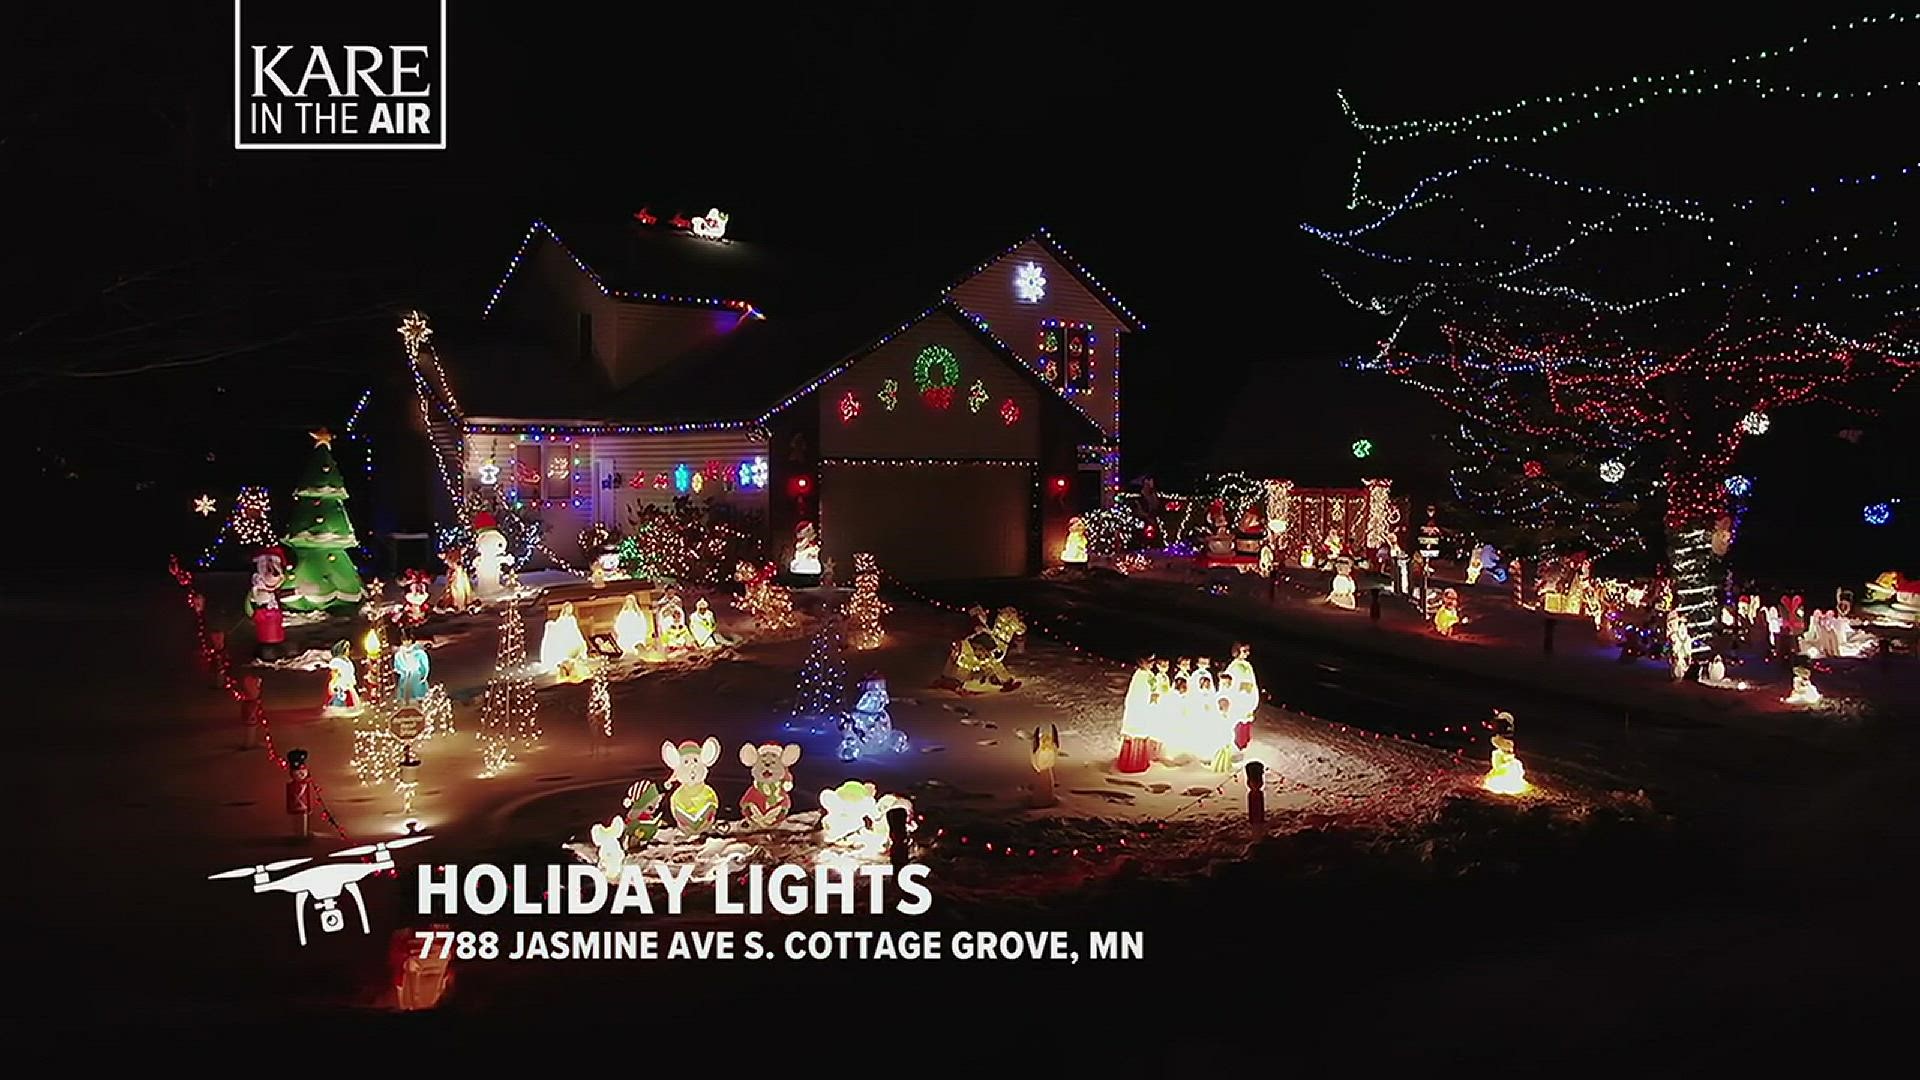 Three houses in Cottage Grove have gone all out in their Christmas displays!